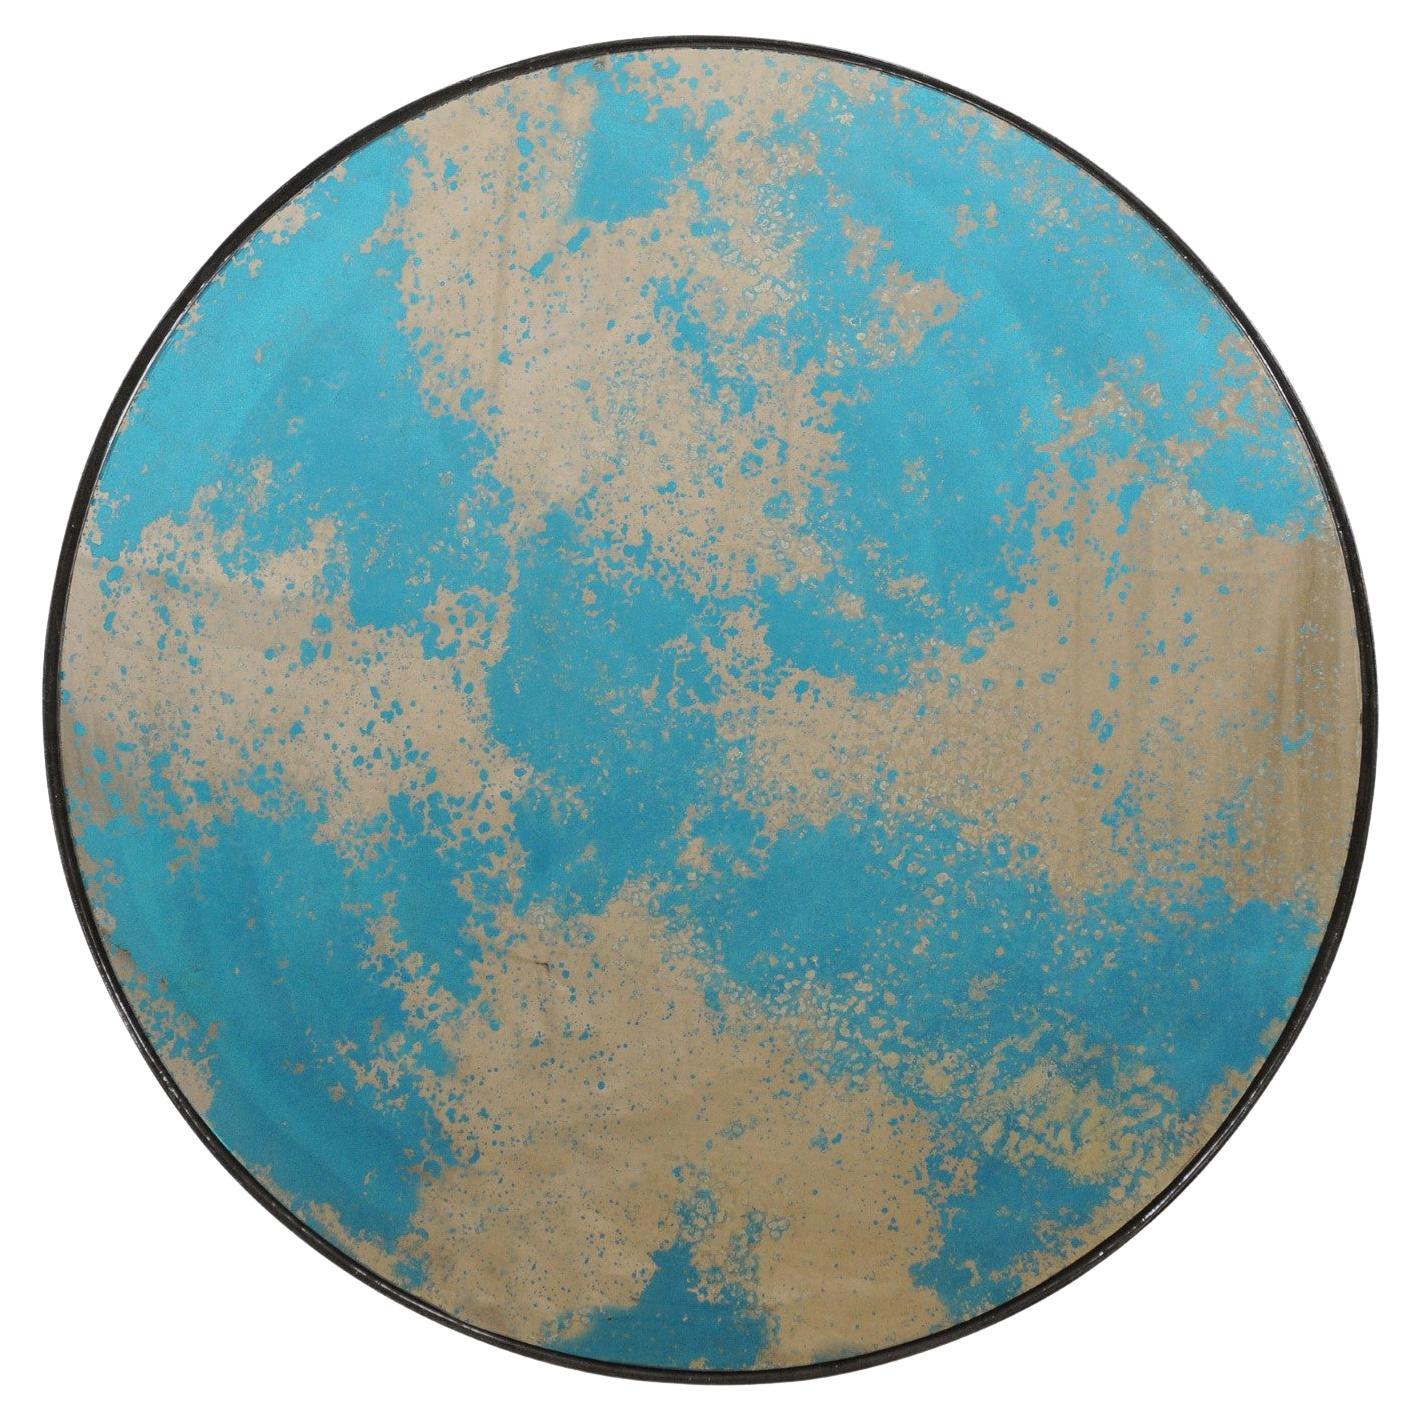 Artisan Crafted Round-Shaped Mirror with Blue/Green Antiqued Glass